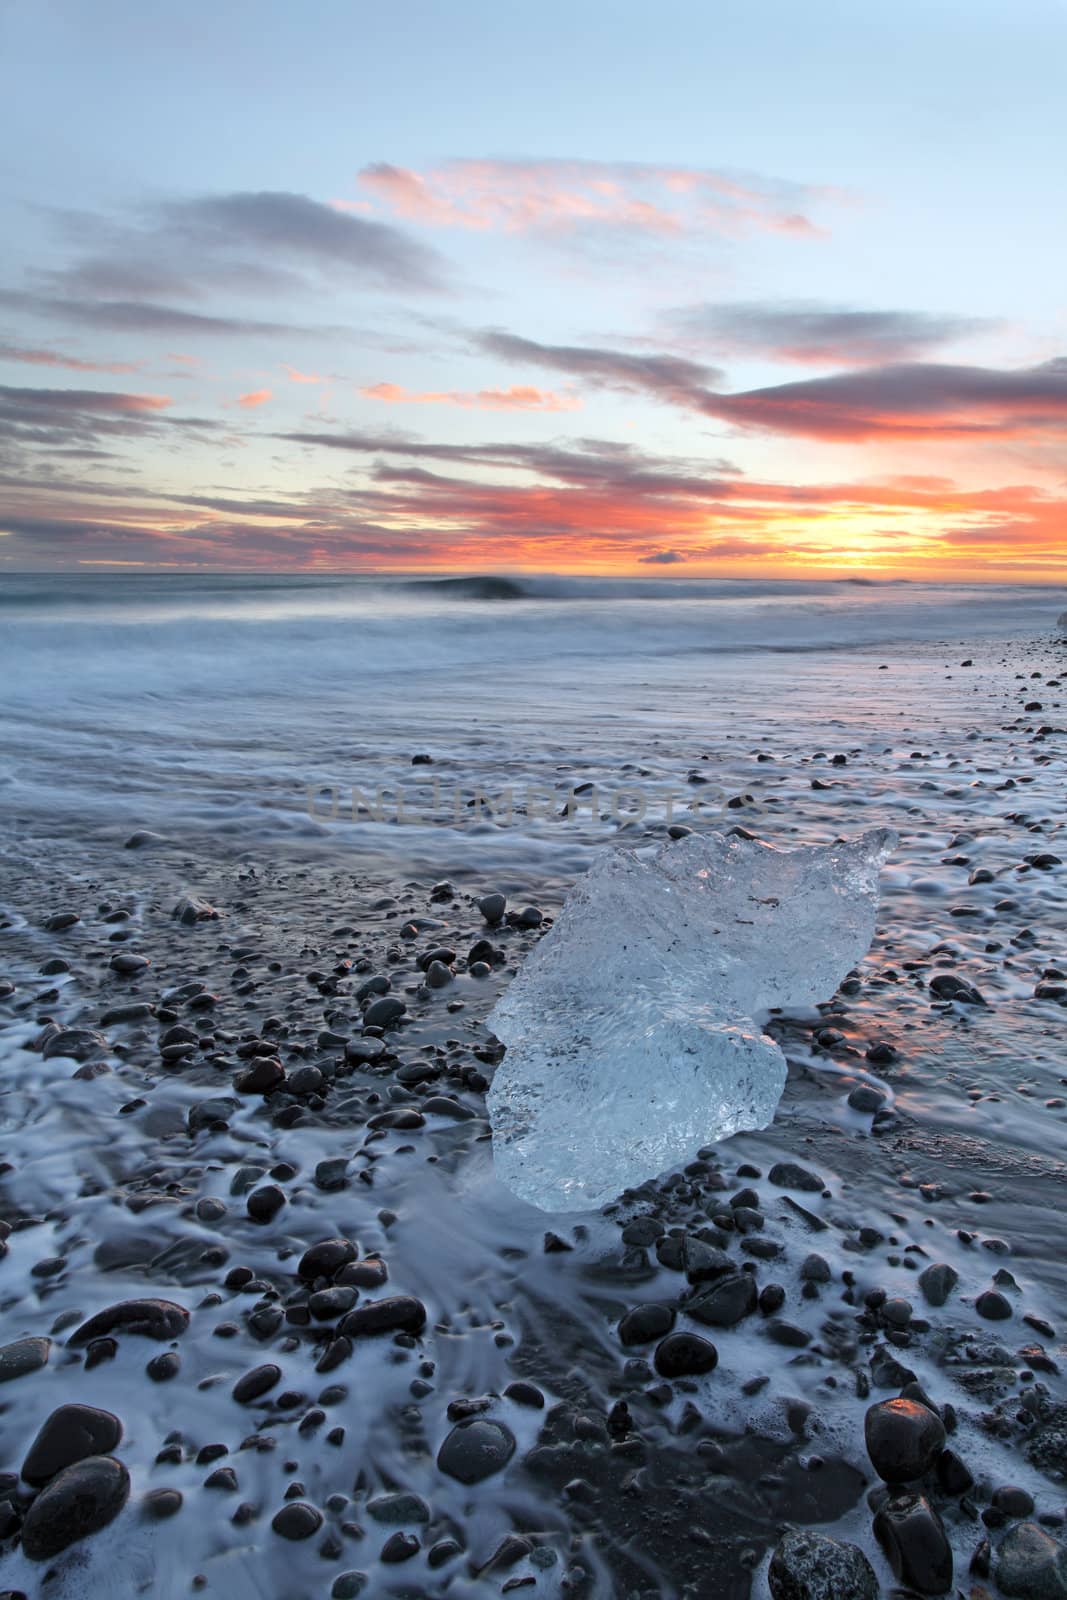 Iceburg on vocanic black sand beach at sunset in south Iceland